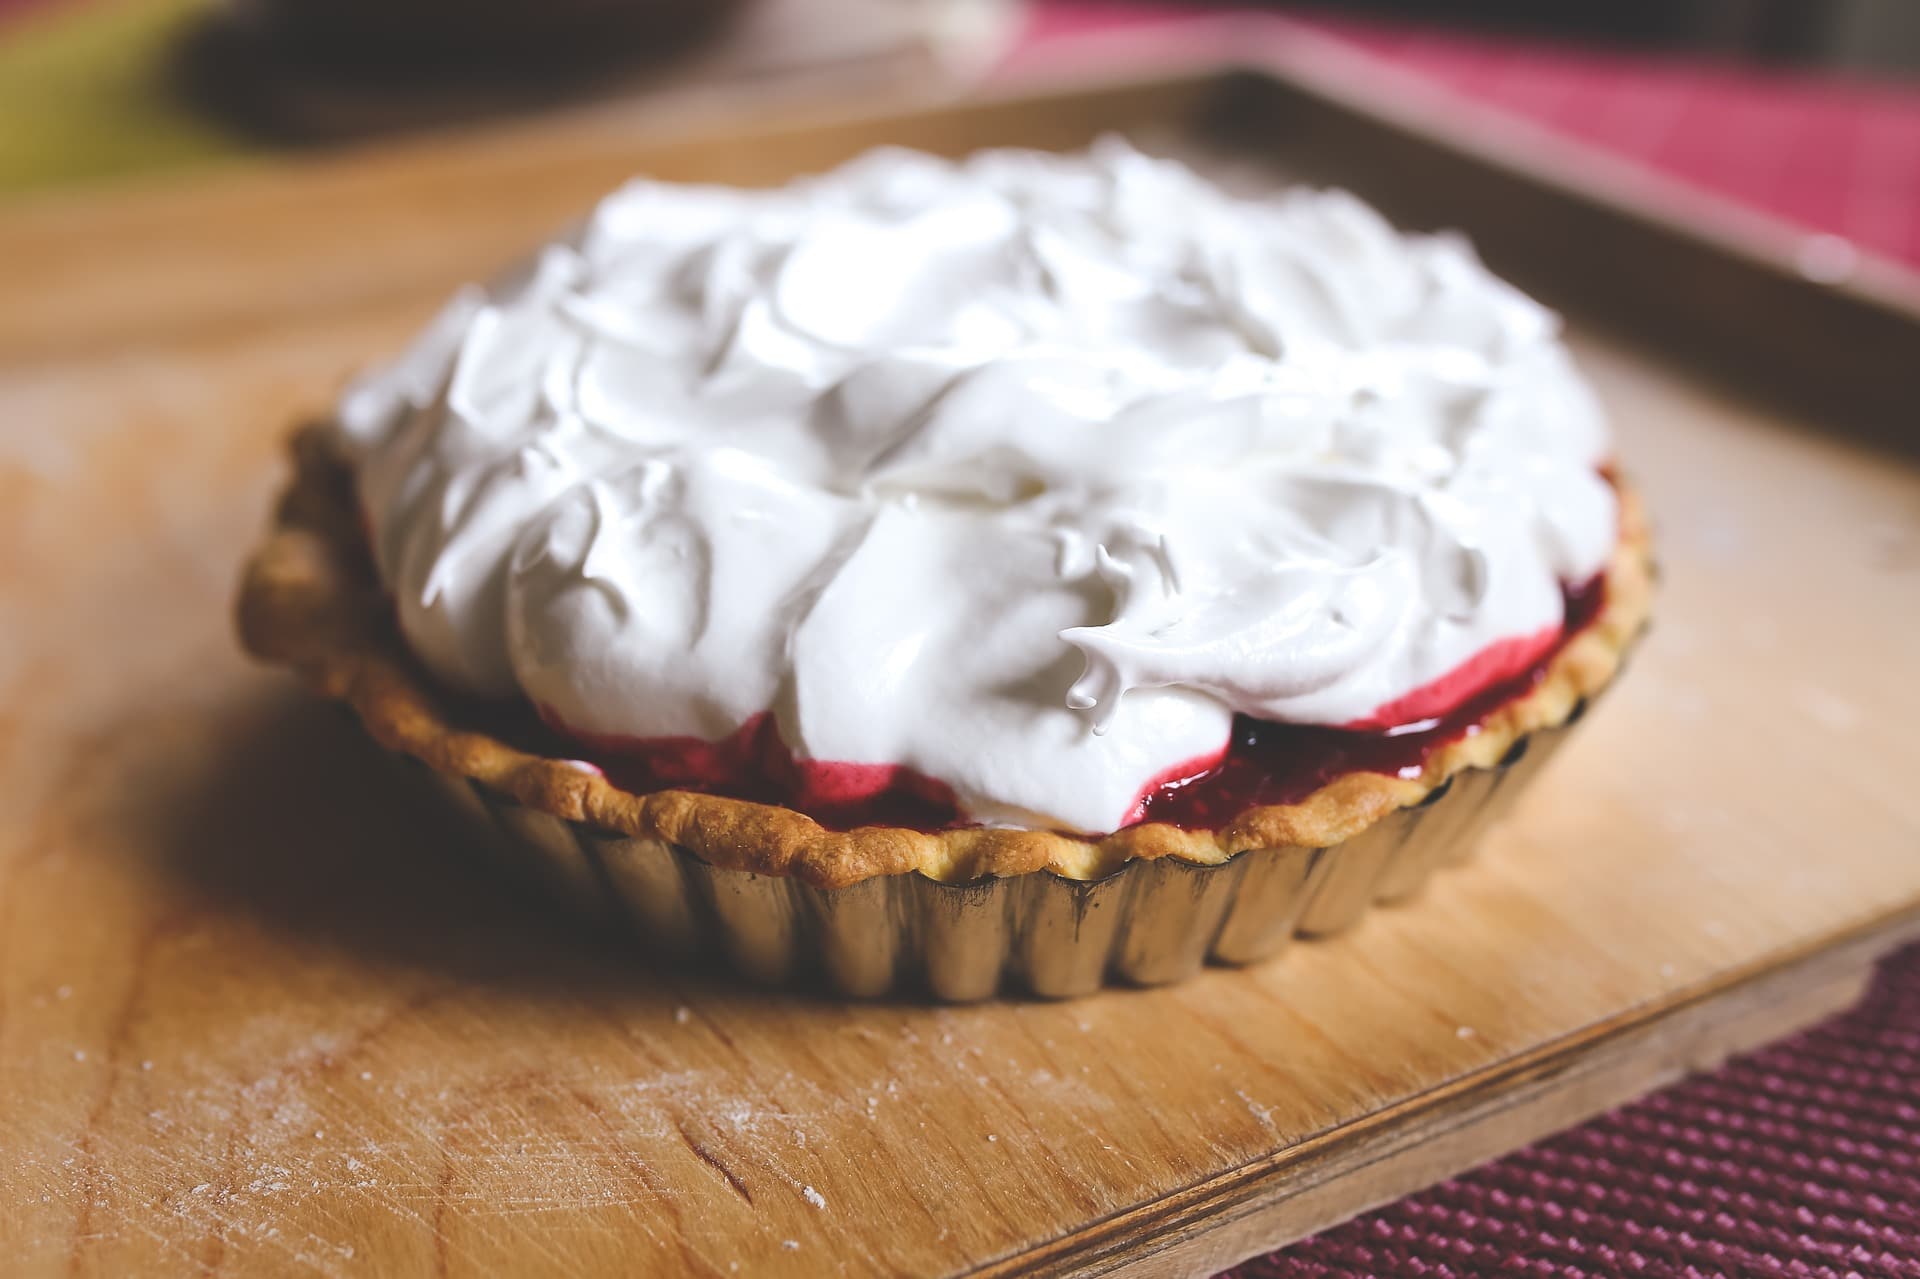 A meringue tart with blind baked crust.